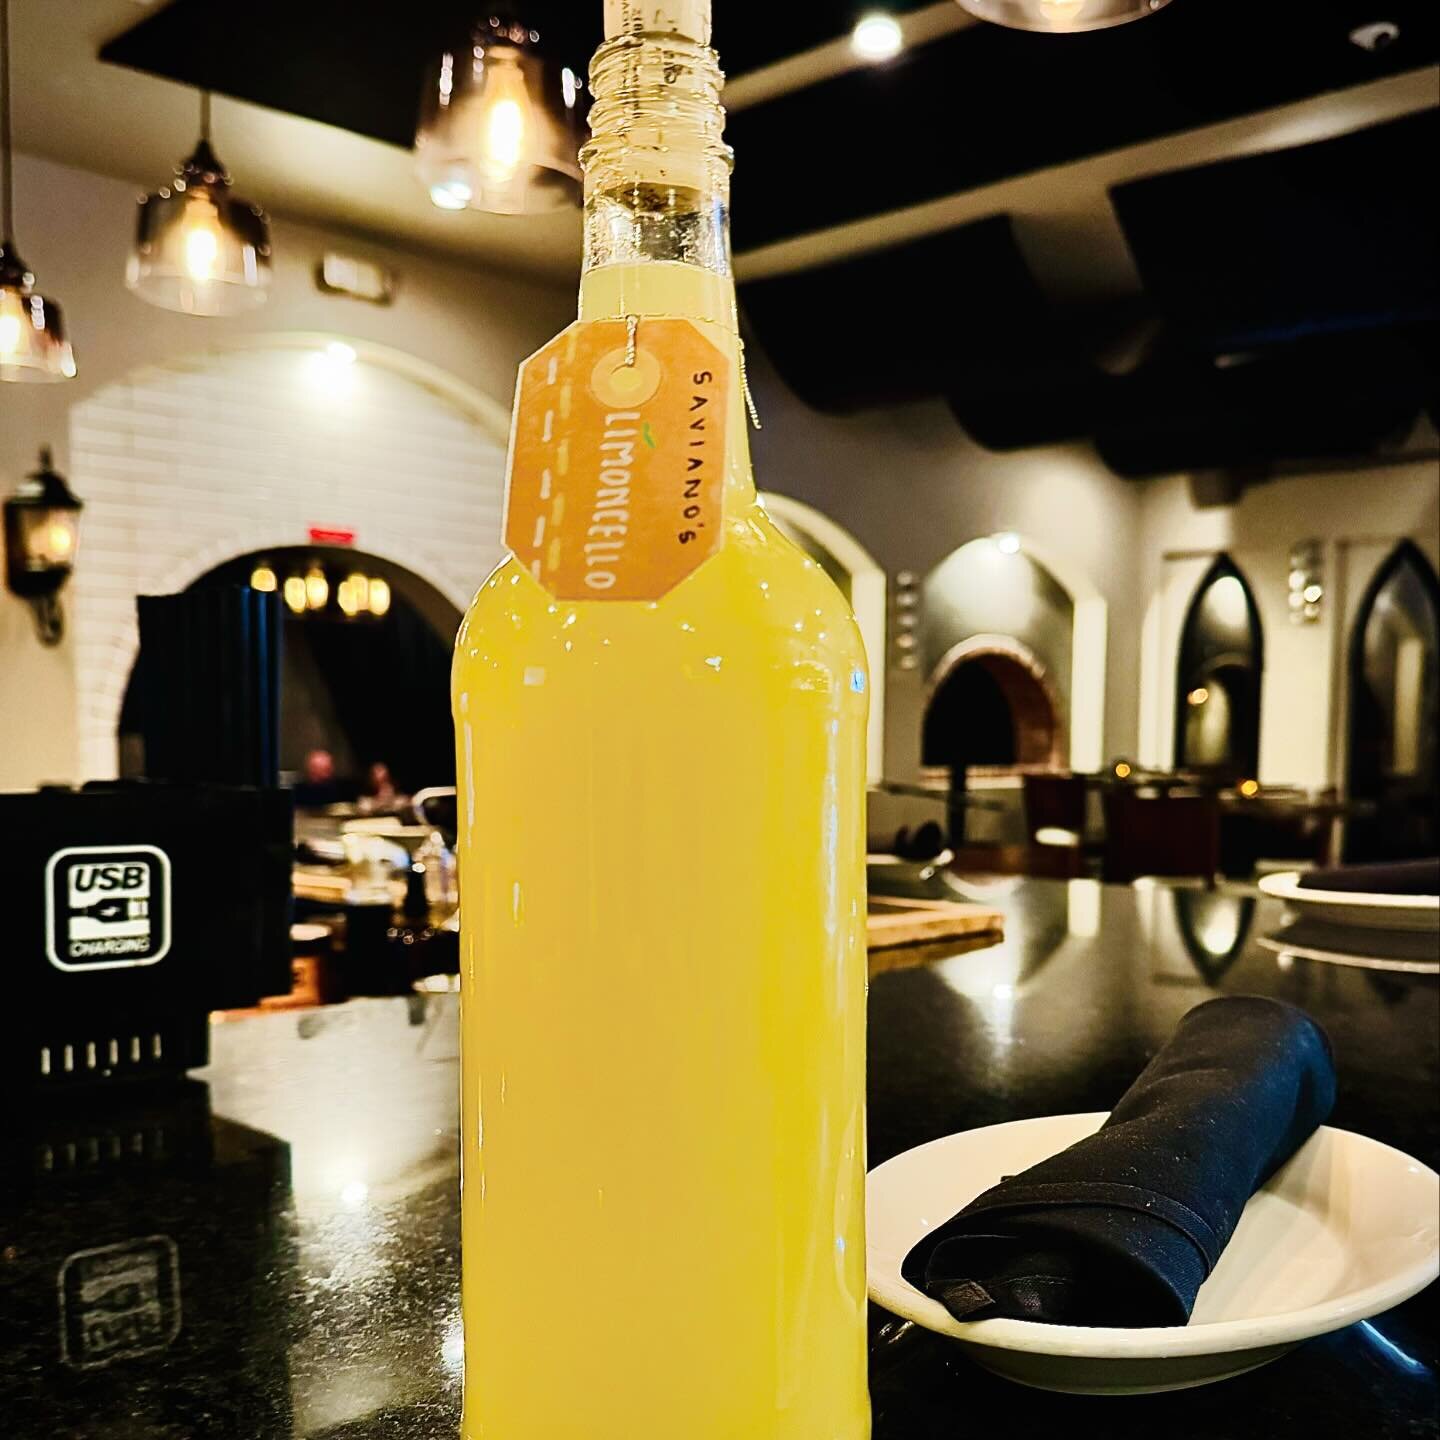 🍕 Dive into the deliciousness of this beautiful Wednesday night at Savianos Italian Kitchen in #Euless! Join us for a delightful evening and savor the unique experience of our homemade Limoncello, crafted from scratch. A taste of Italy just for you!